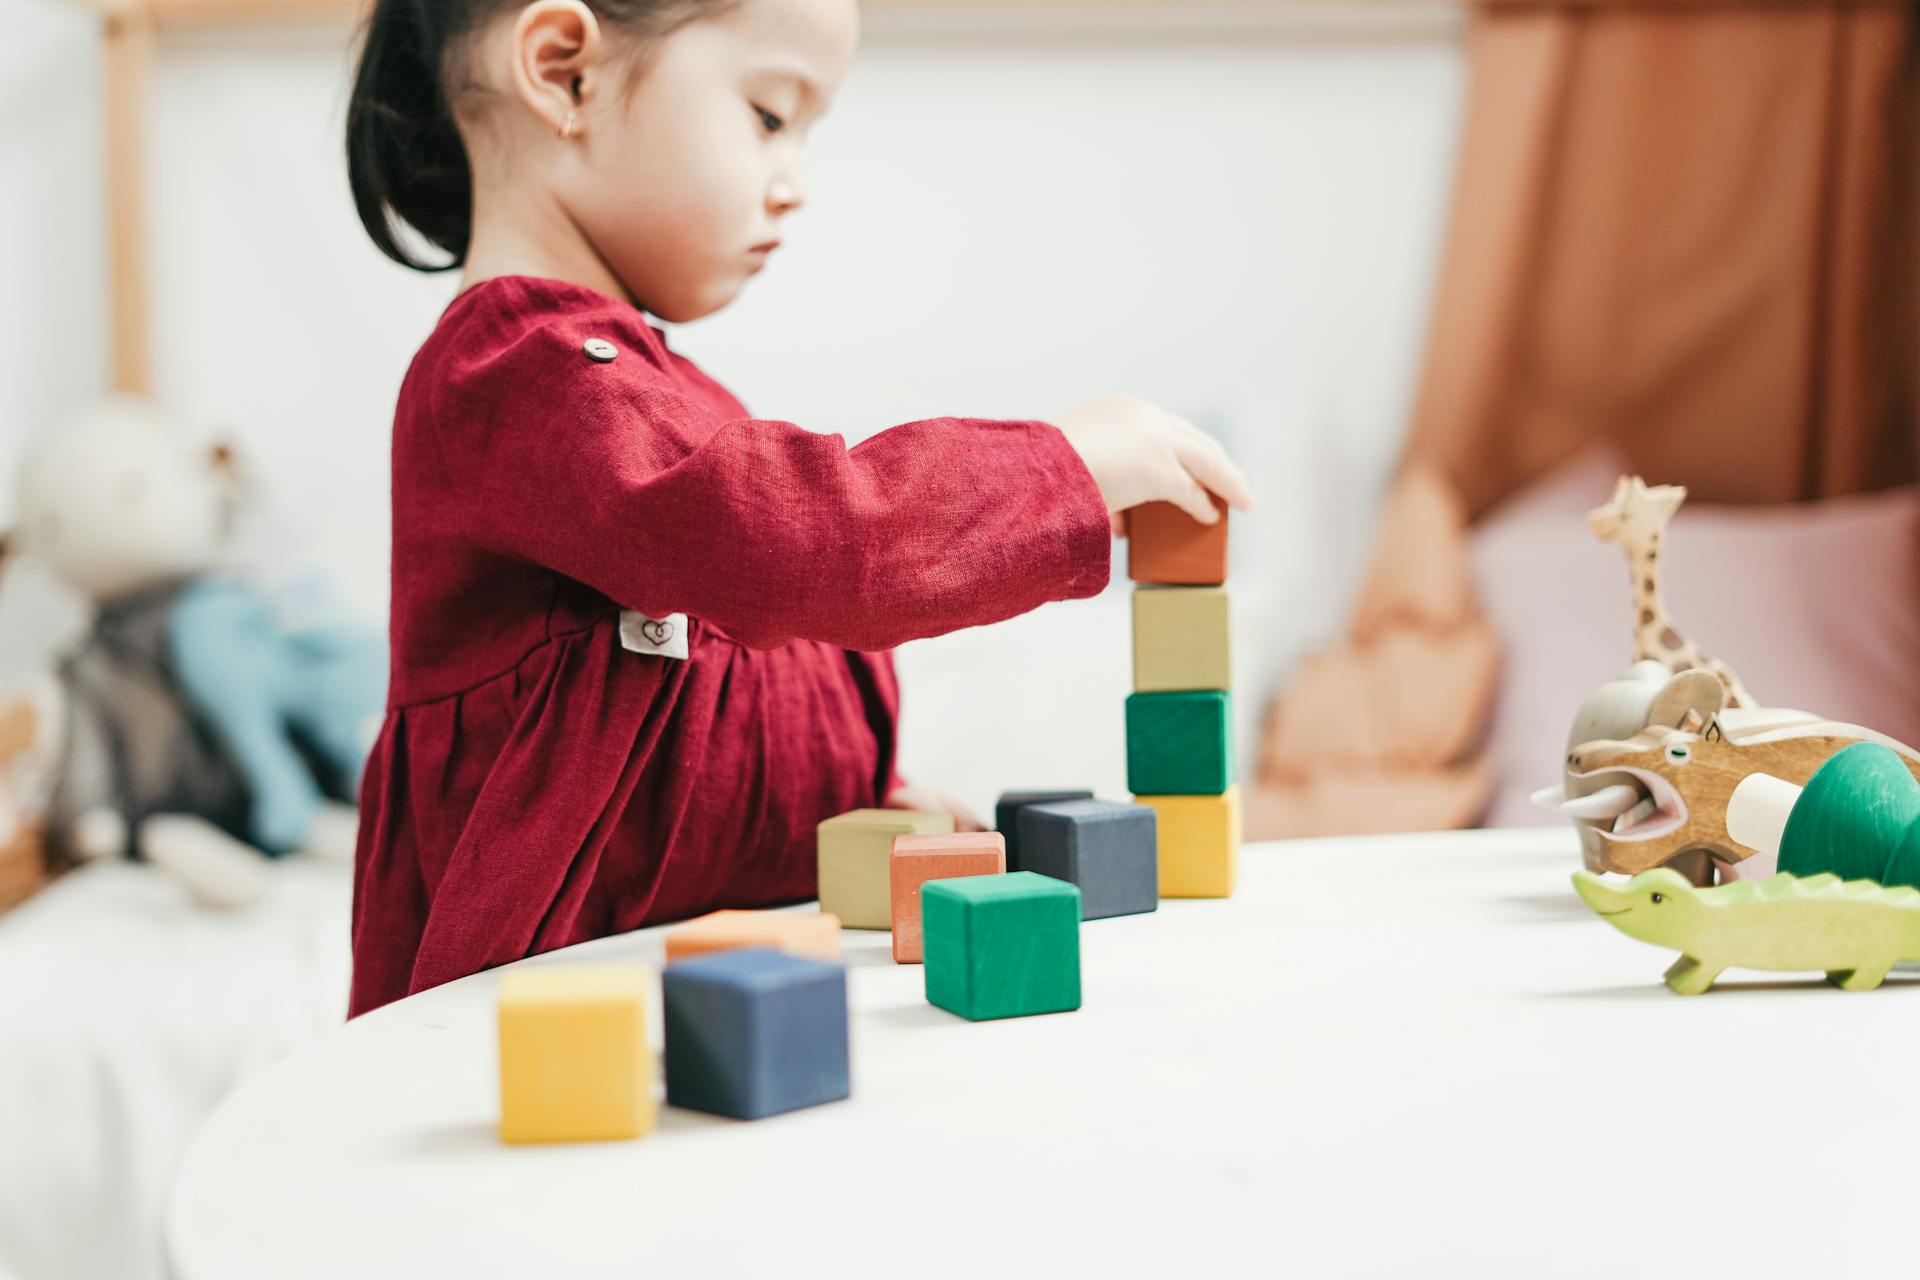 child in a red dress playing with colorful blocks on a table.